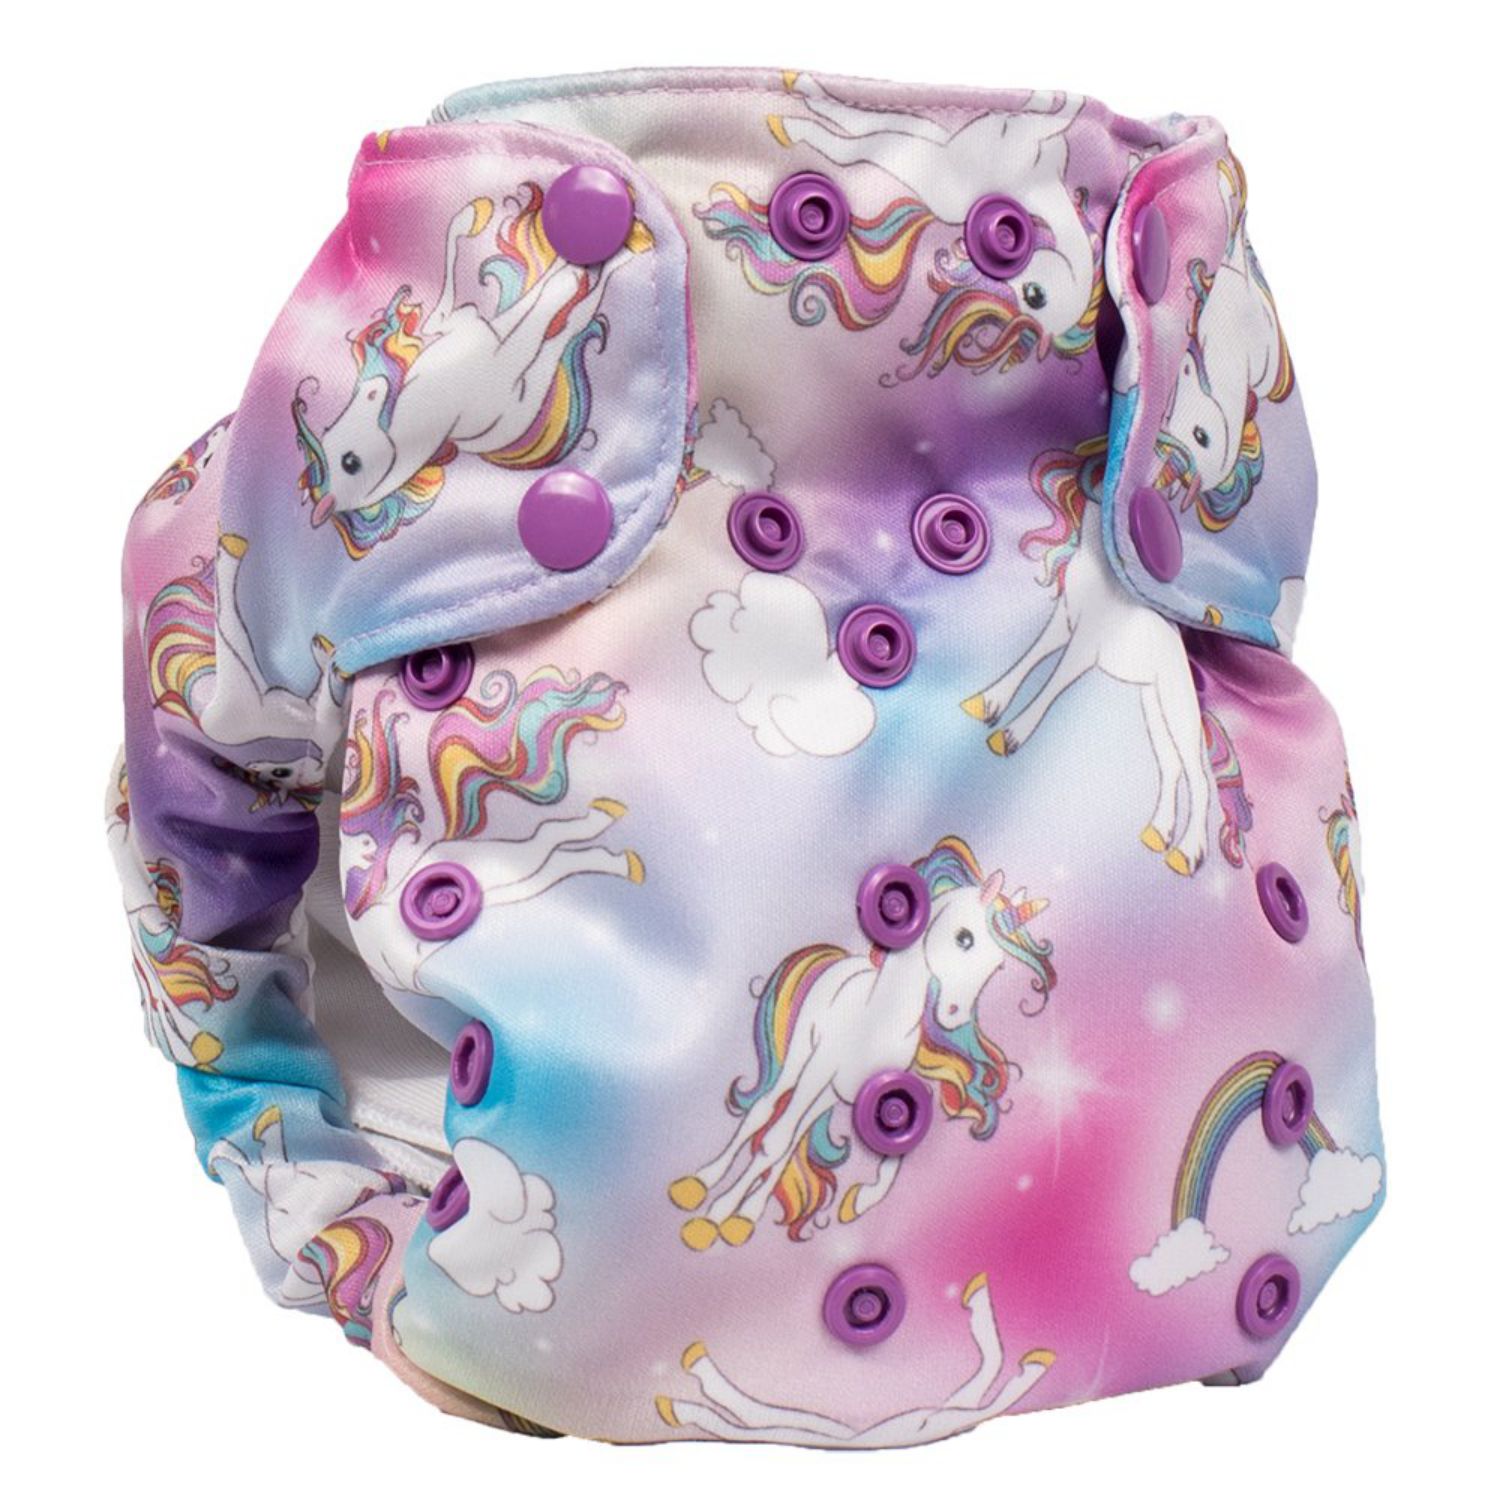 Smart Bottoms Dream Diaper 2.0 AIO One Size Pattern: Chasing Rainbows